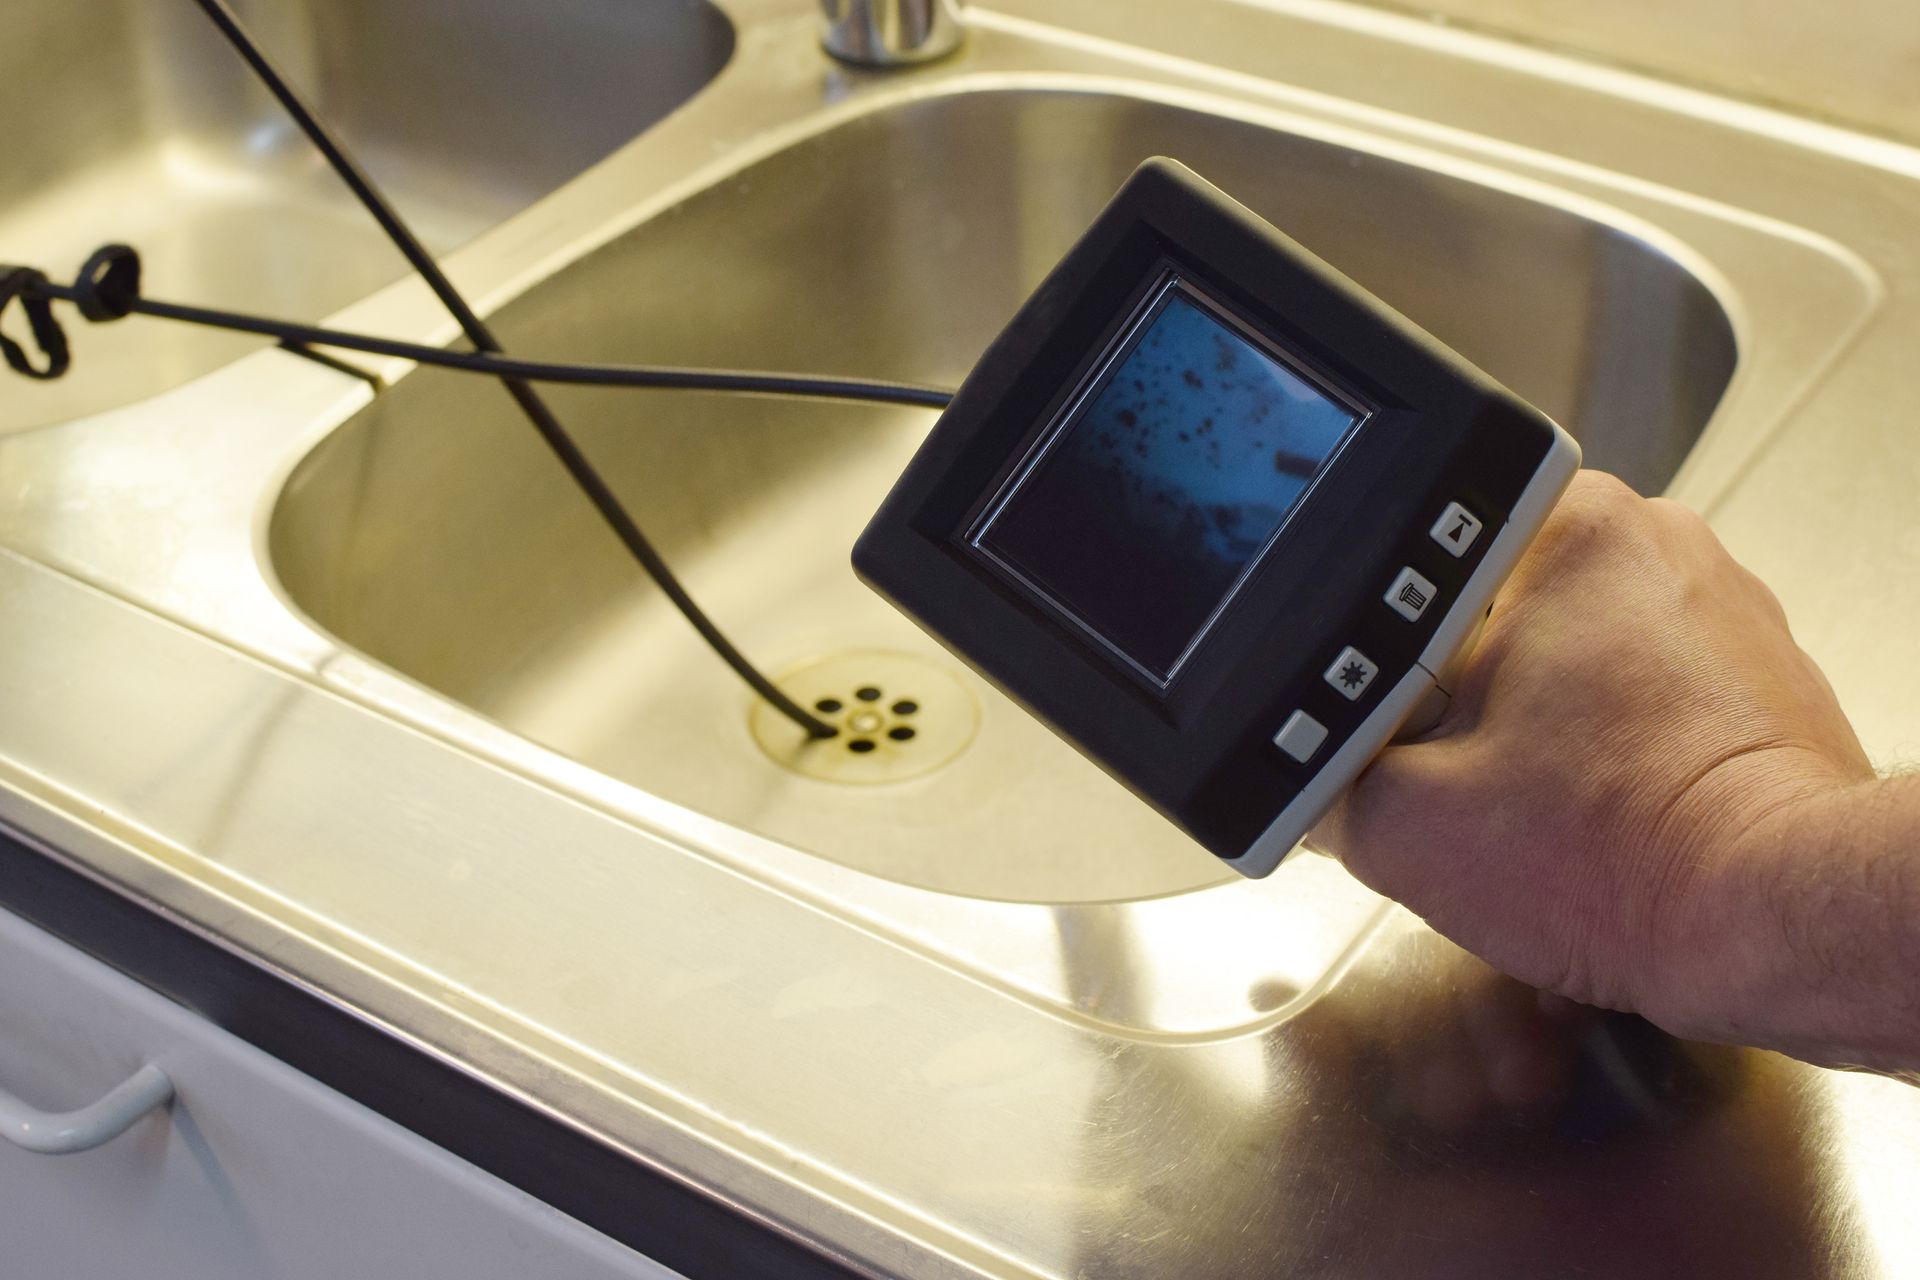 a person is holding a small device over a sink